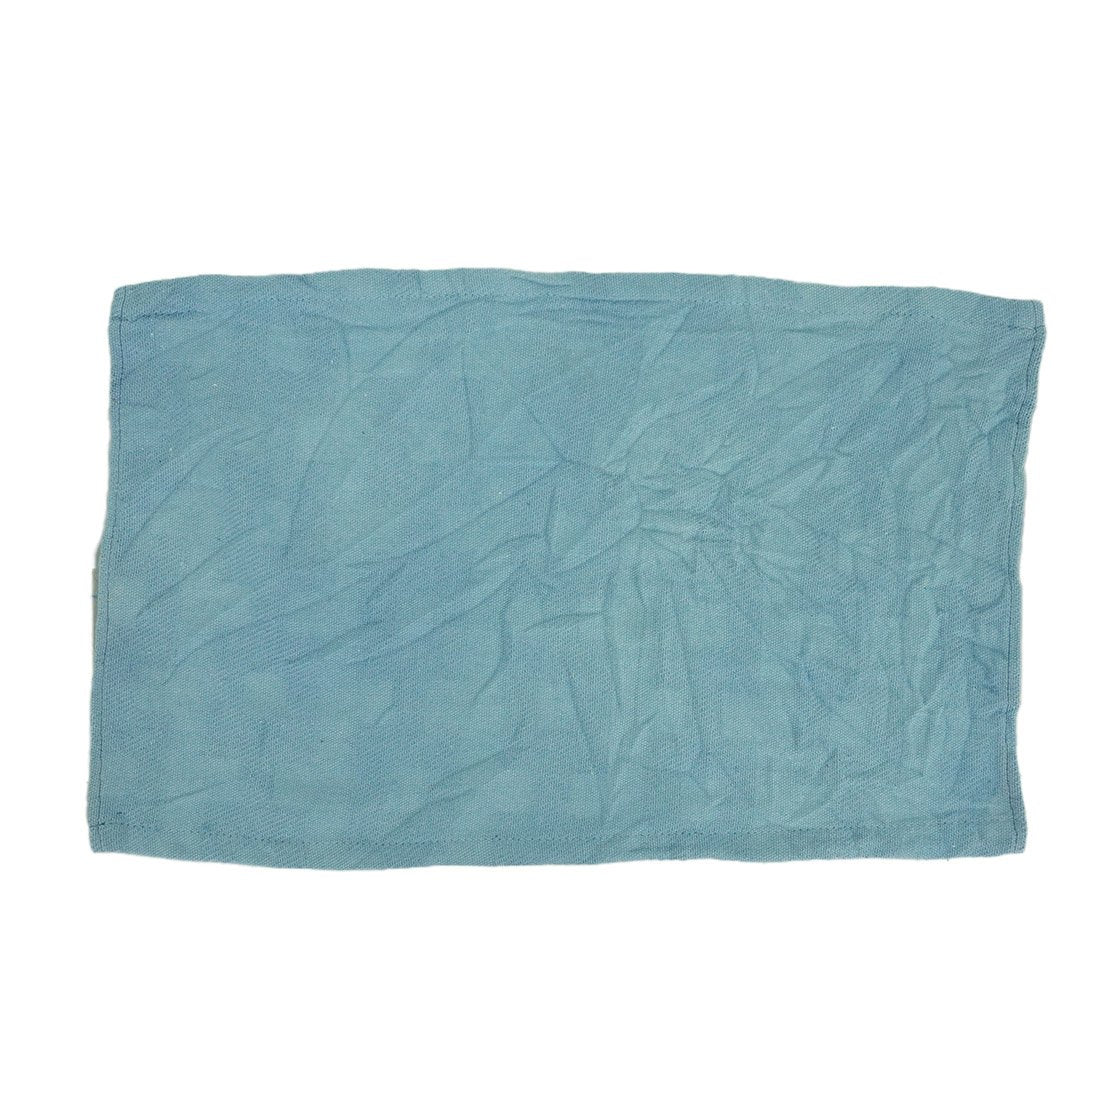 Recycled Surgical Towels Mixed Wrinkle View